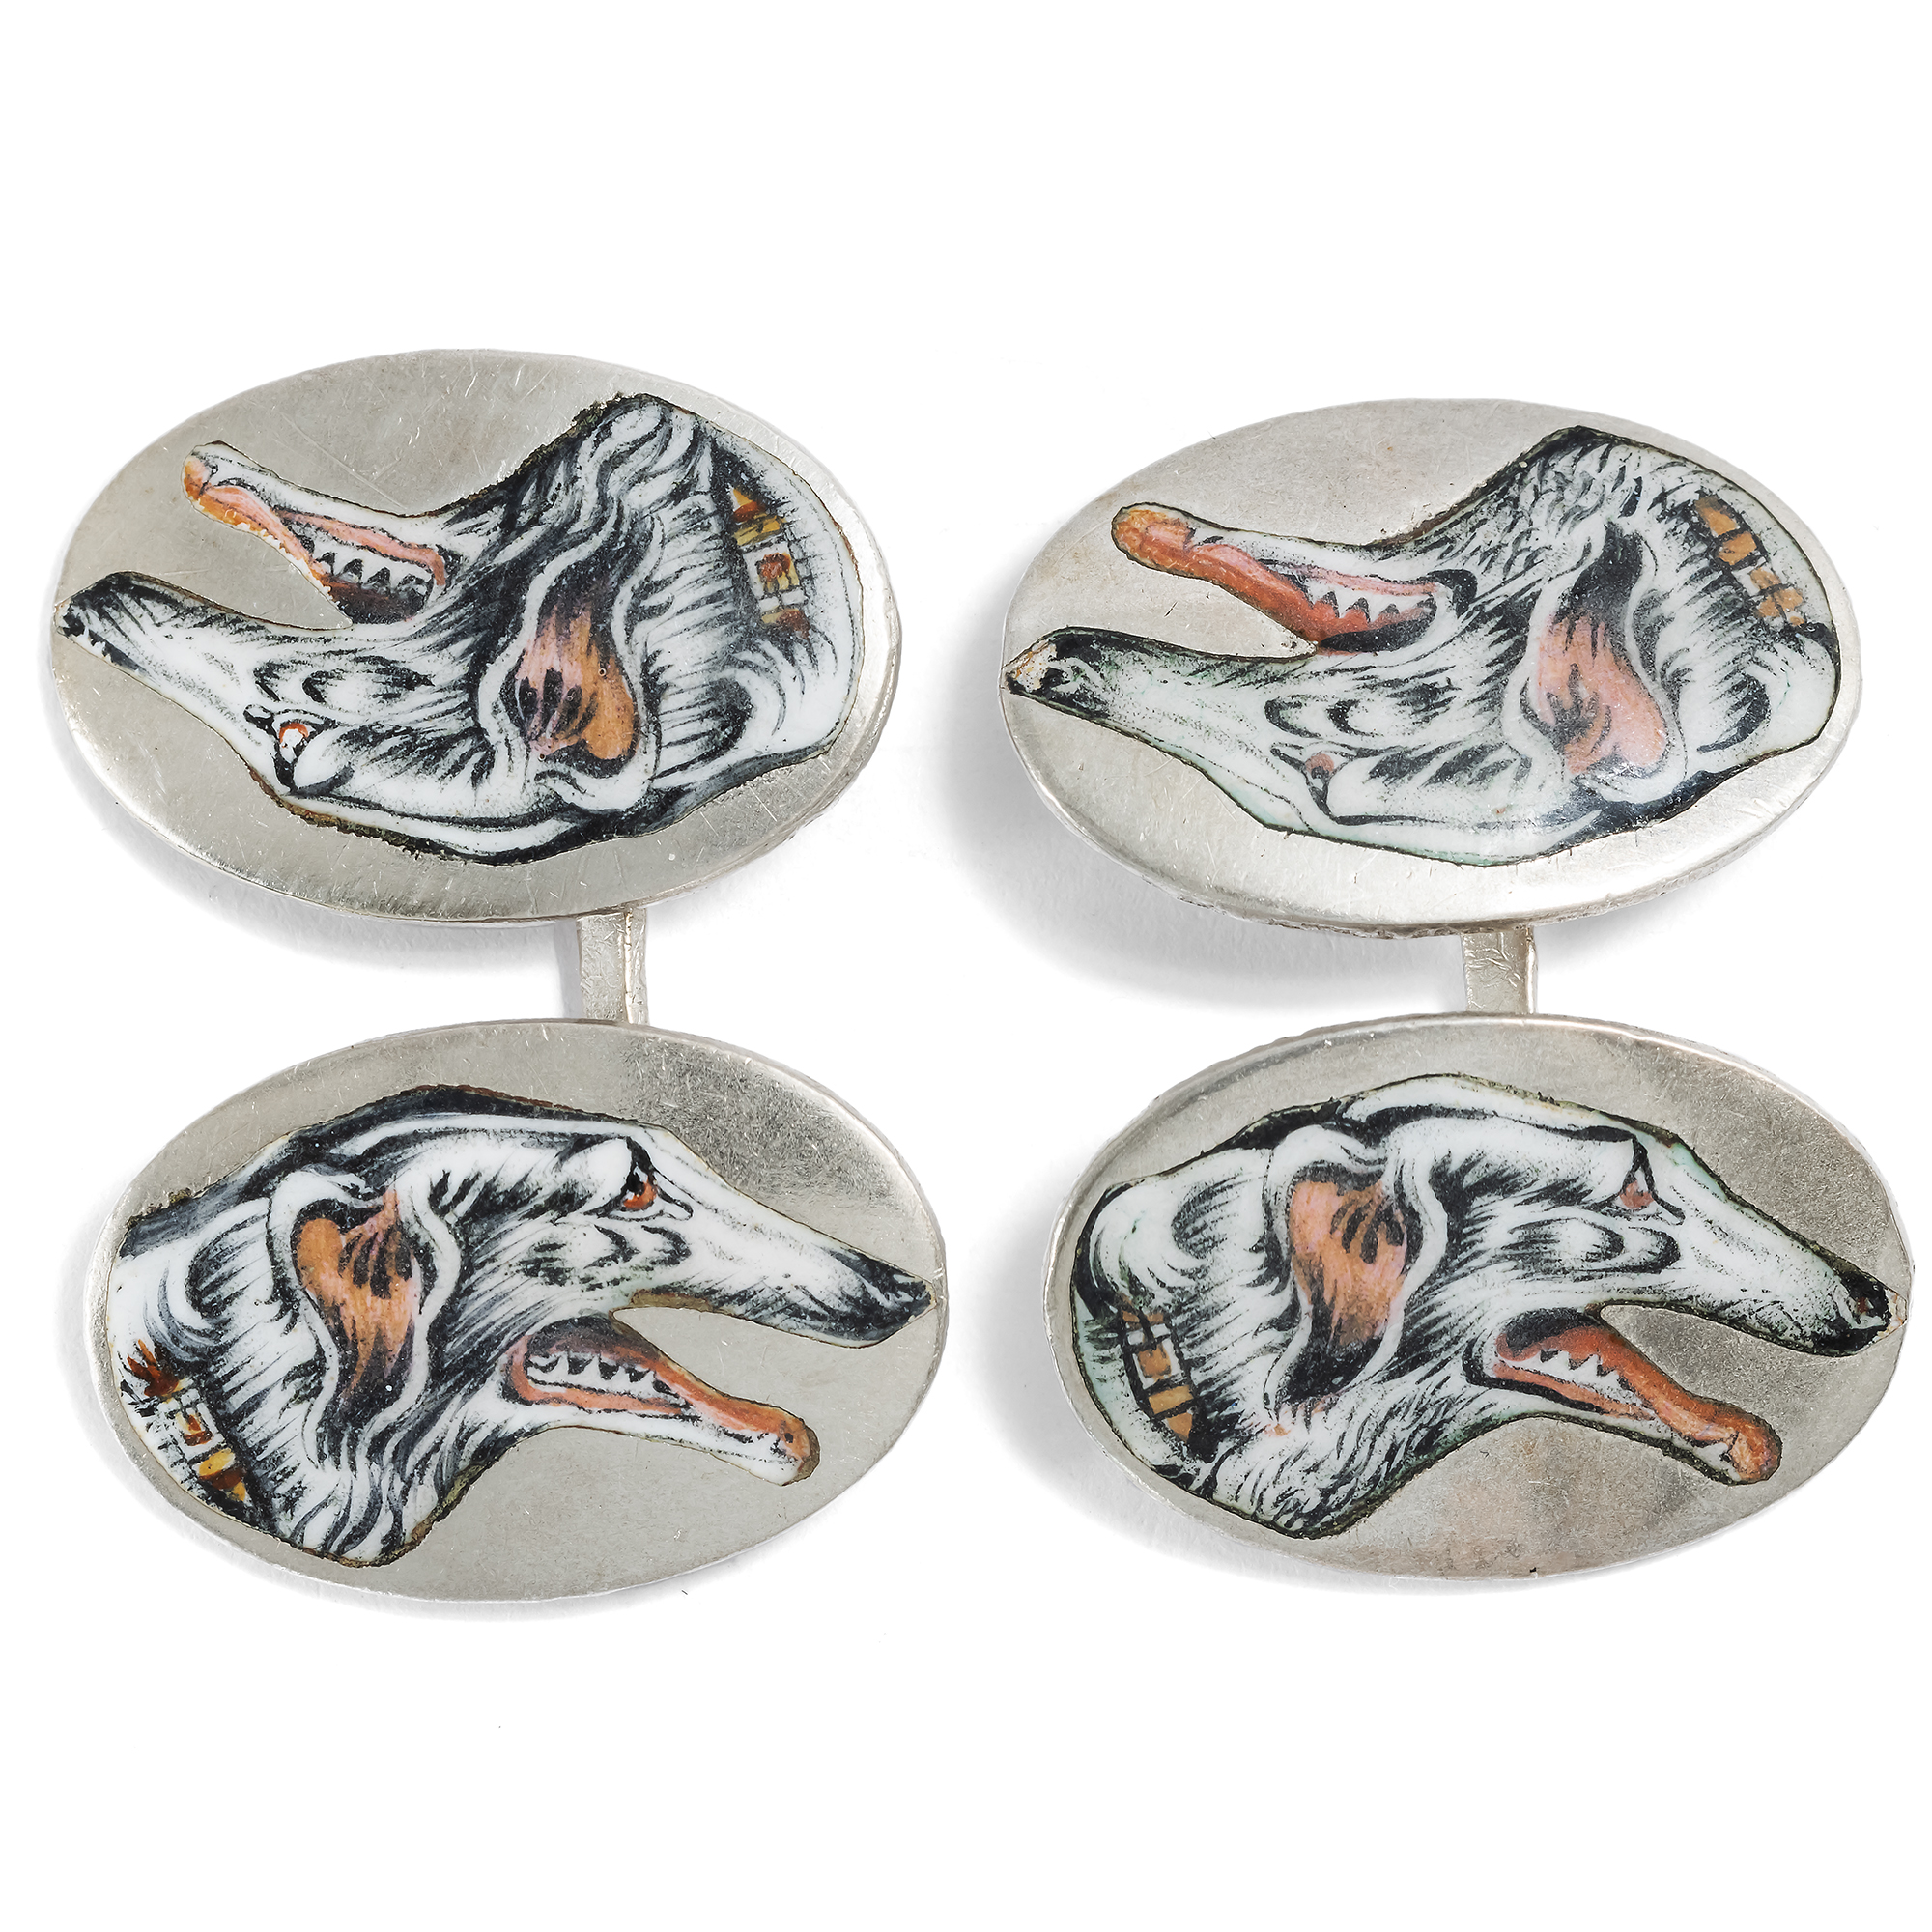 Victorian Novelty Cufflinks with Enameled Borzoi Dogs, c. 1900